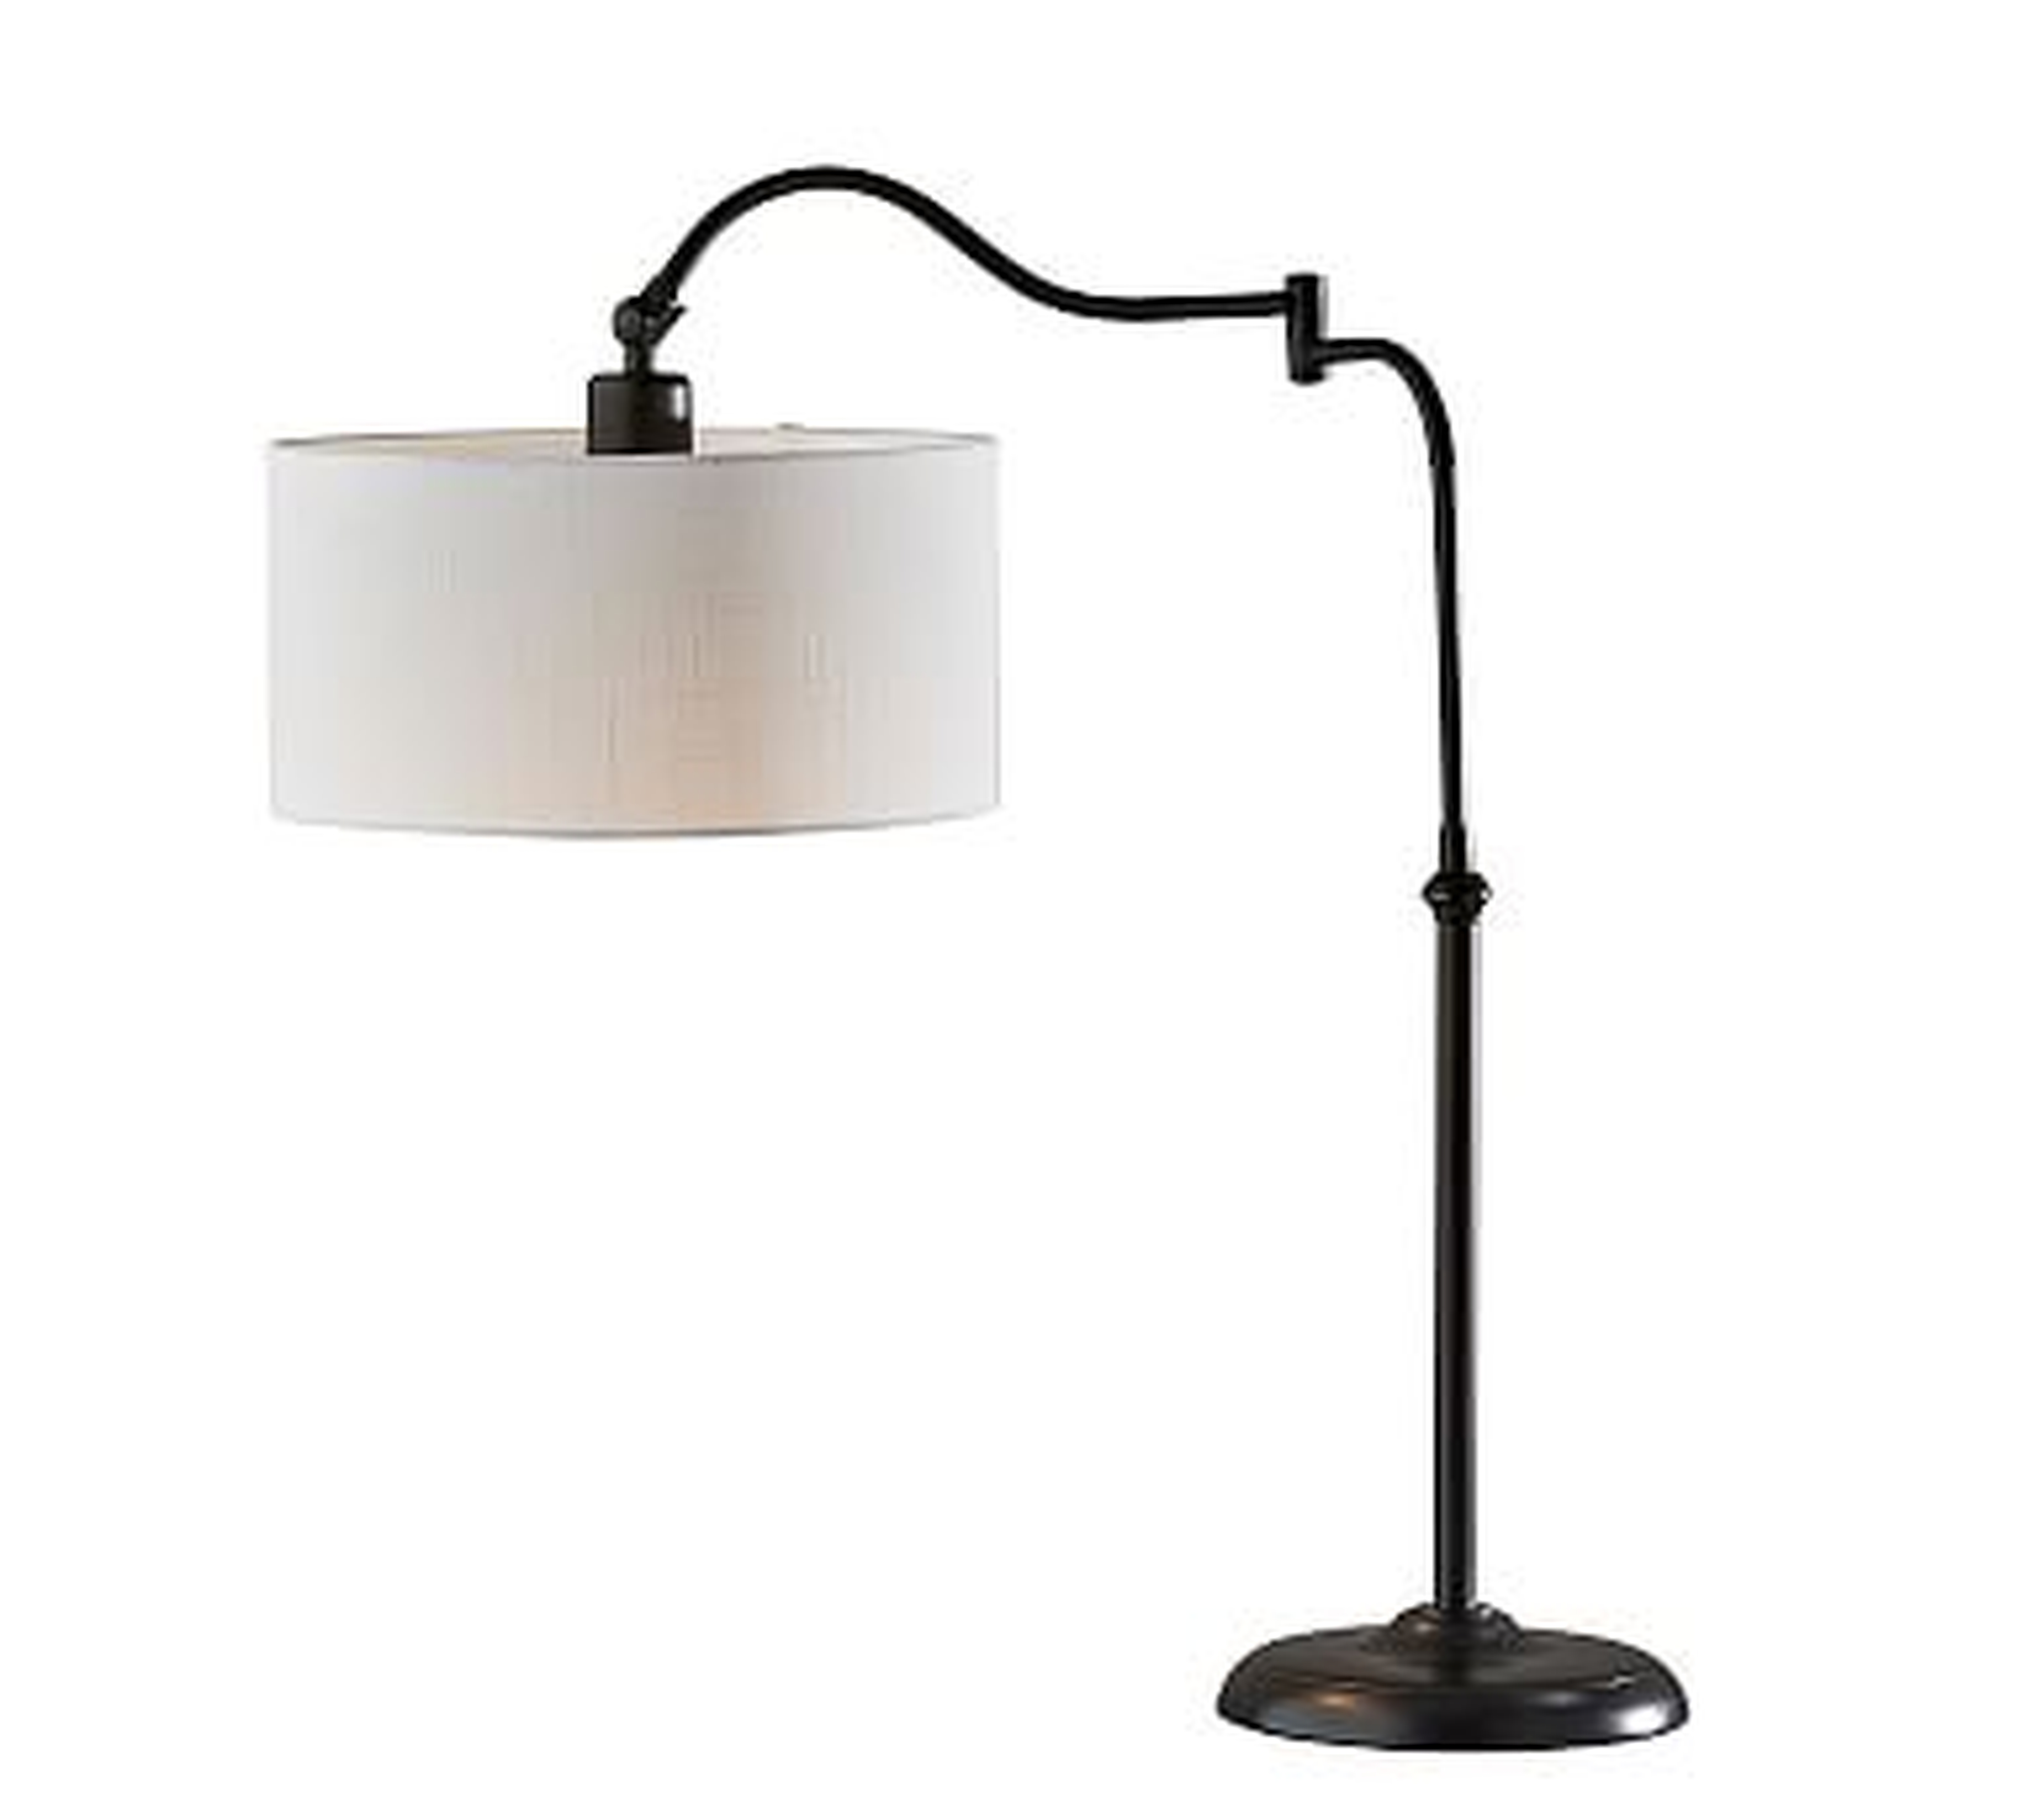 Downing Table Lamp, Bronze - Pottery Barn